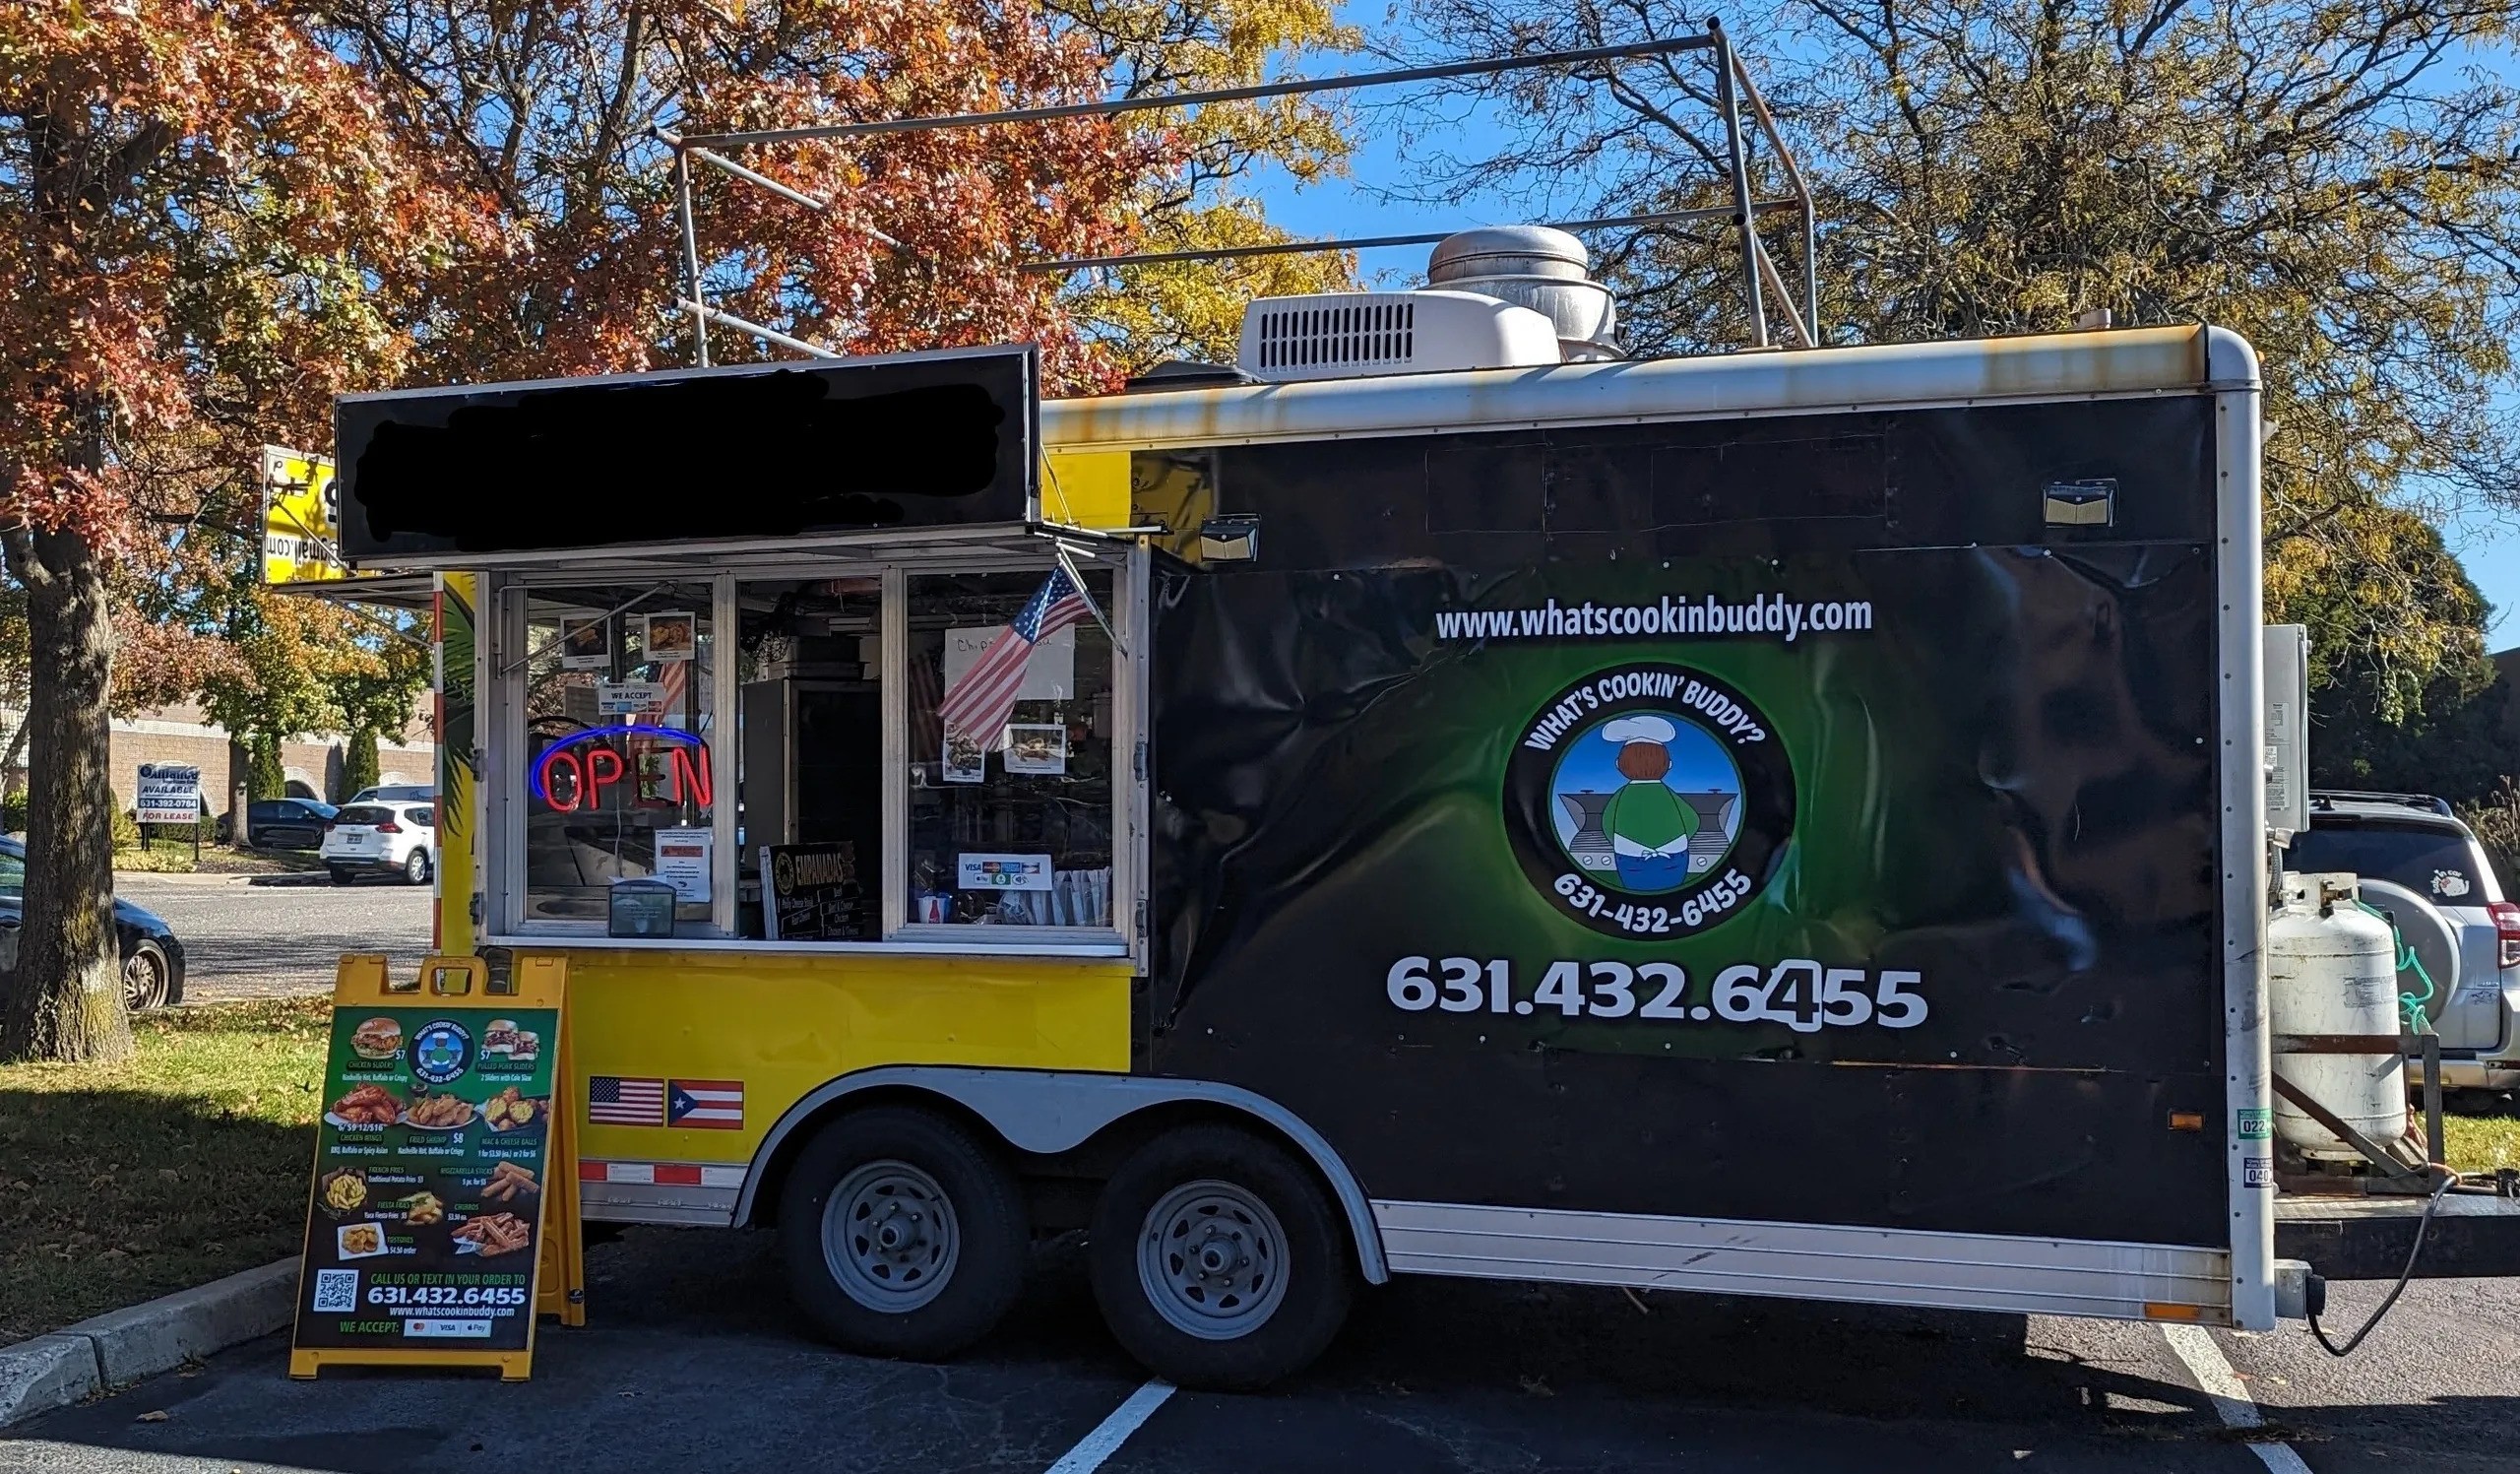 A yellow and green "What's Cooking Buddy" Food Truck in a parking lot with a food menu propped up.